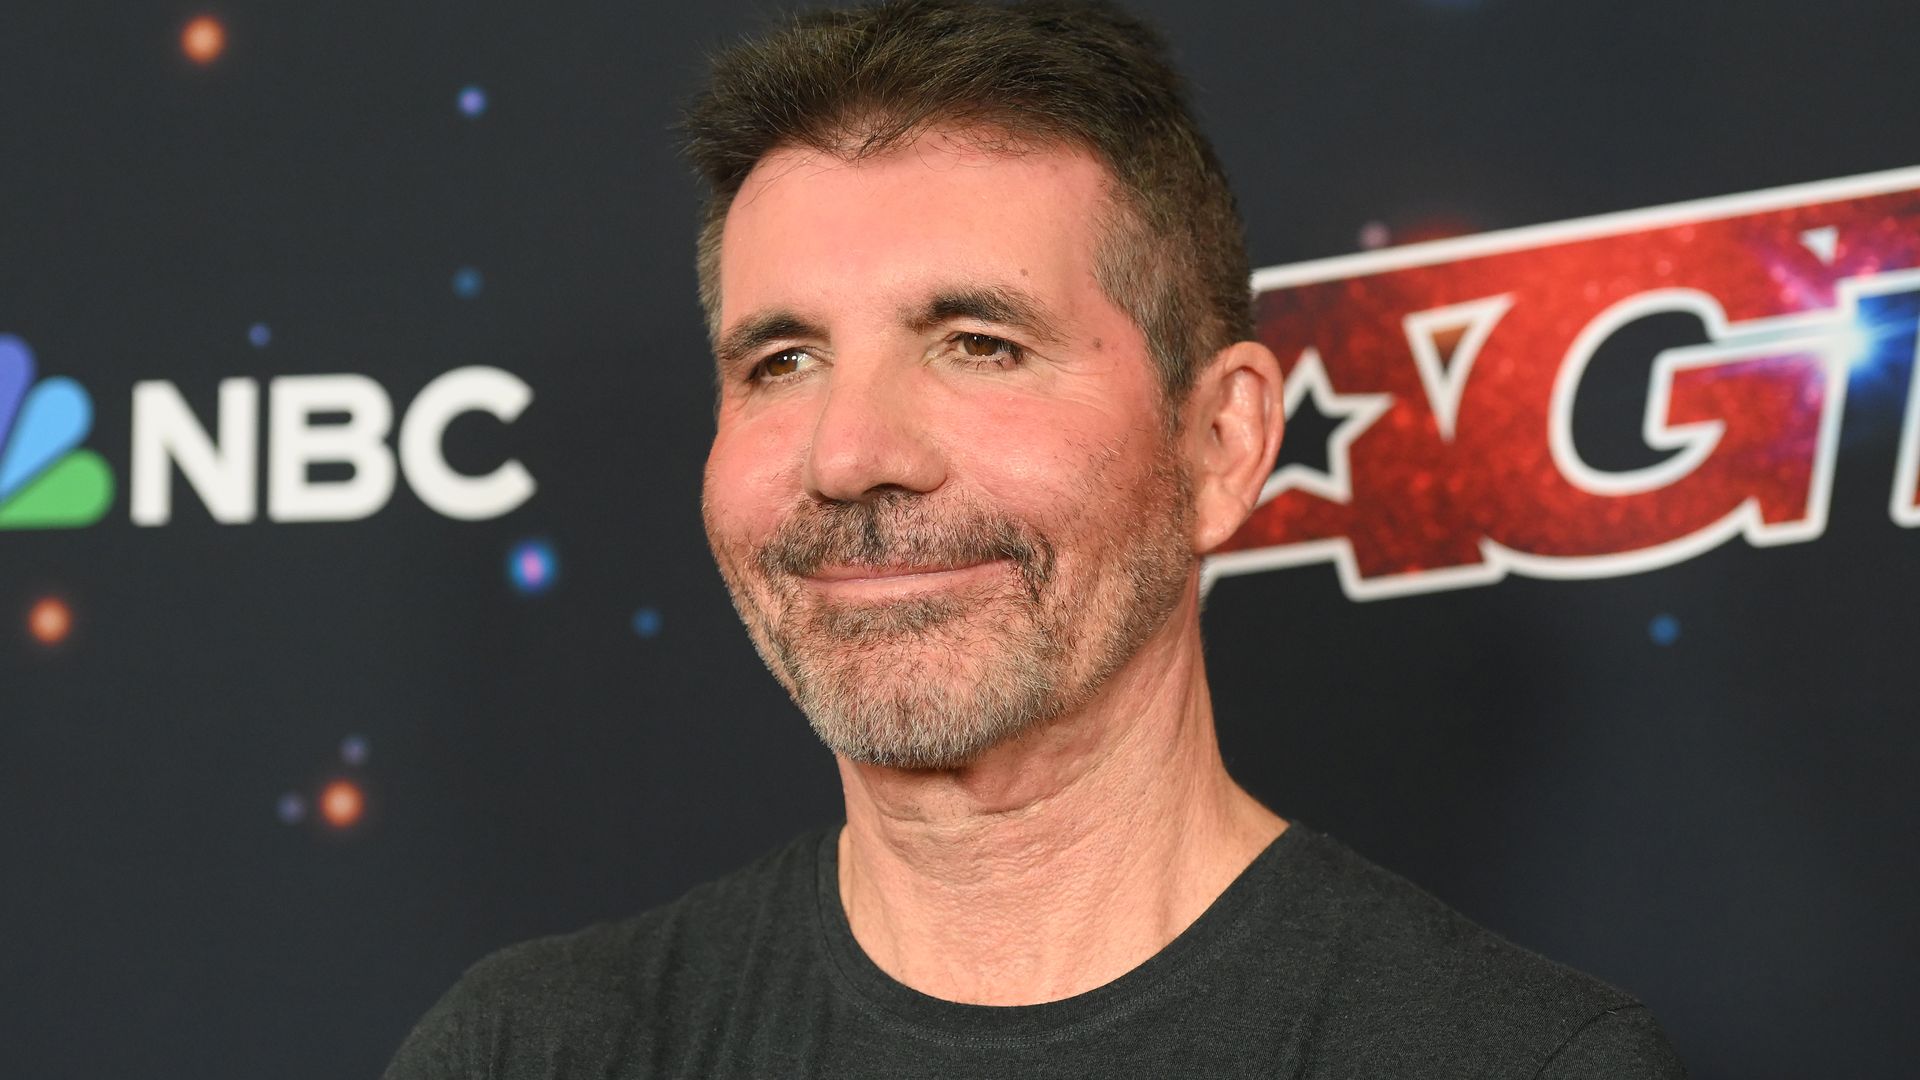 Simon Cowell smiling in a black top